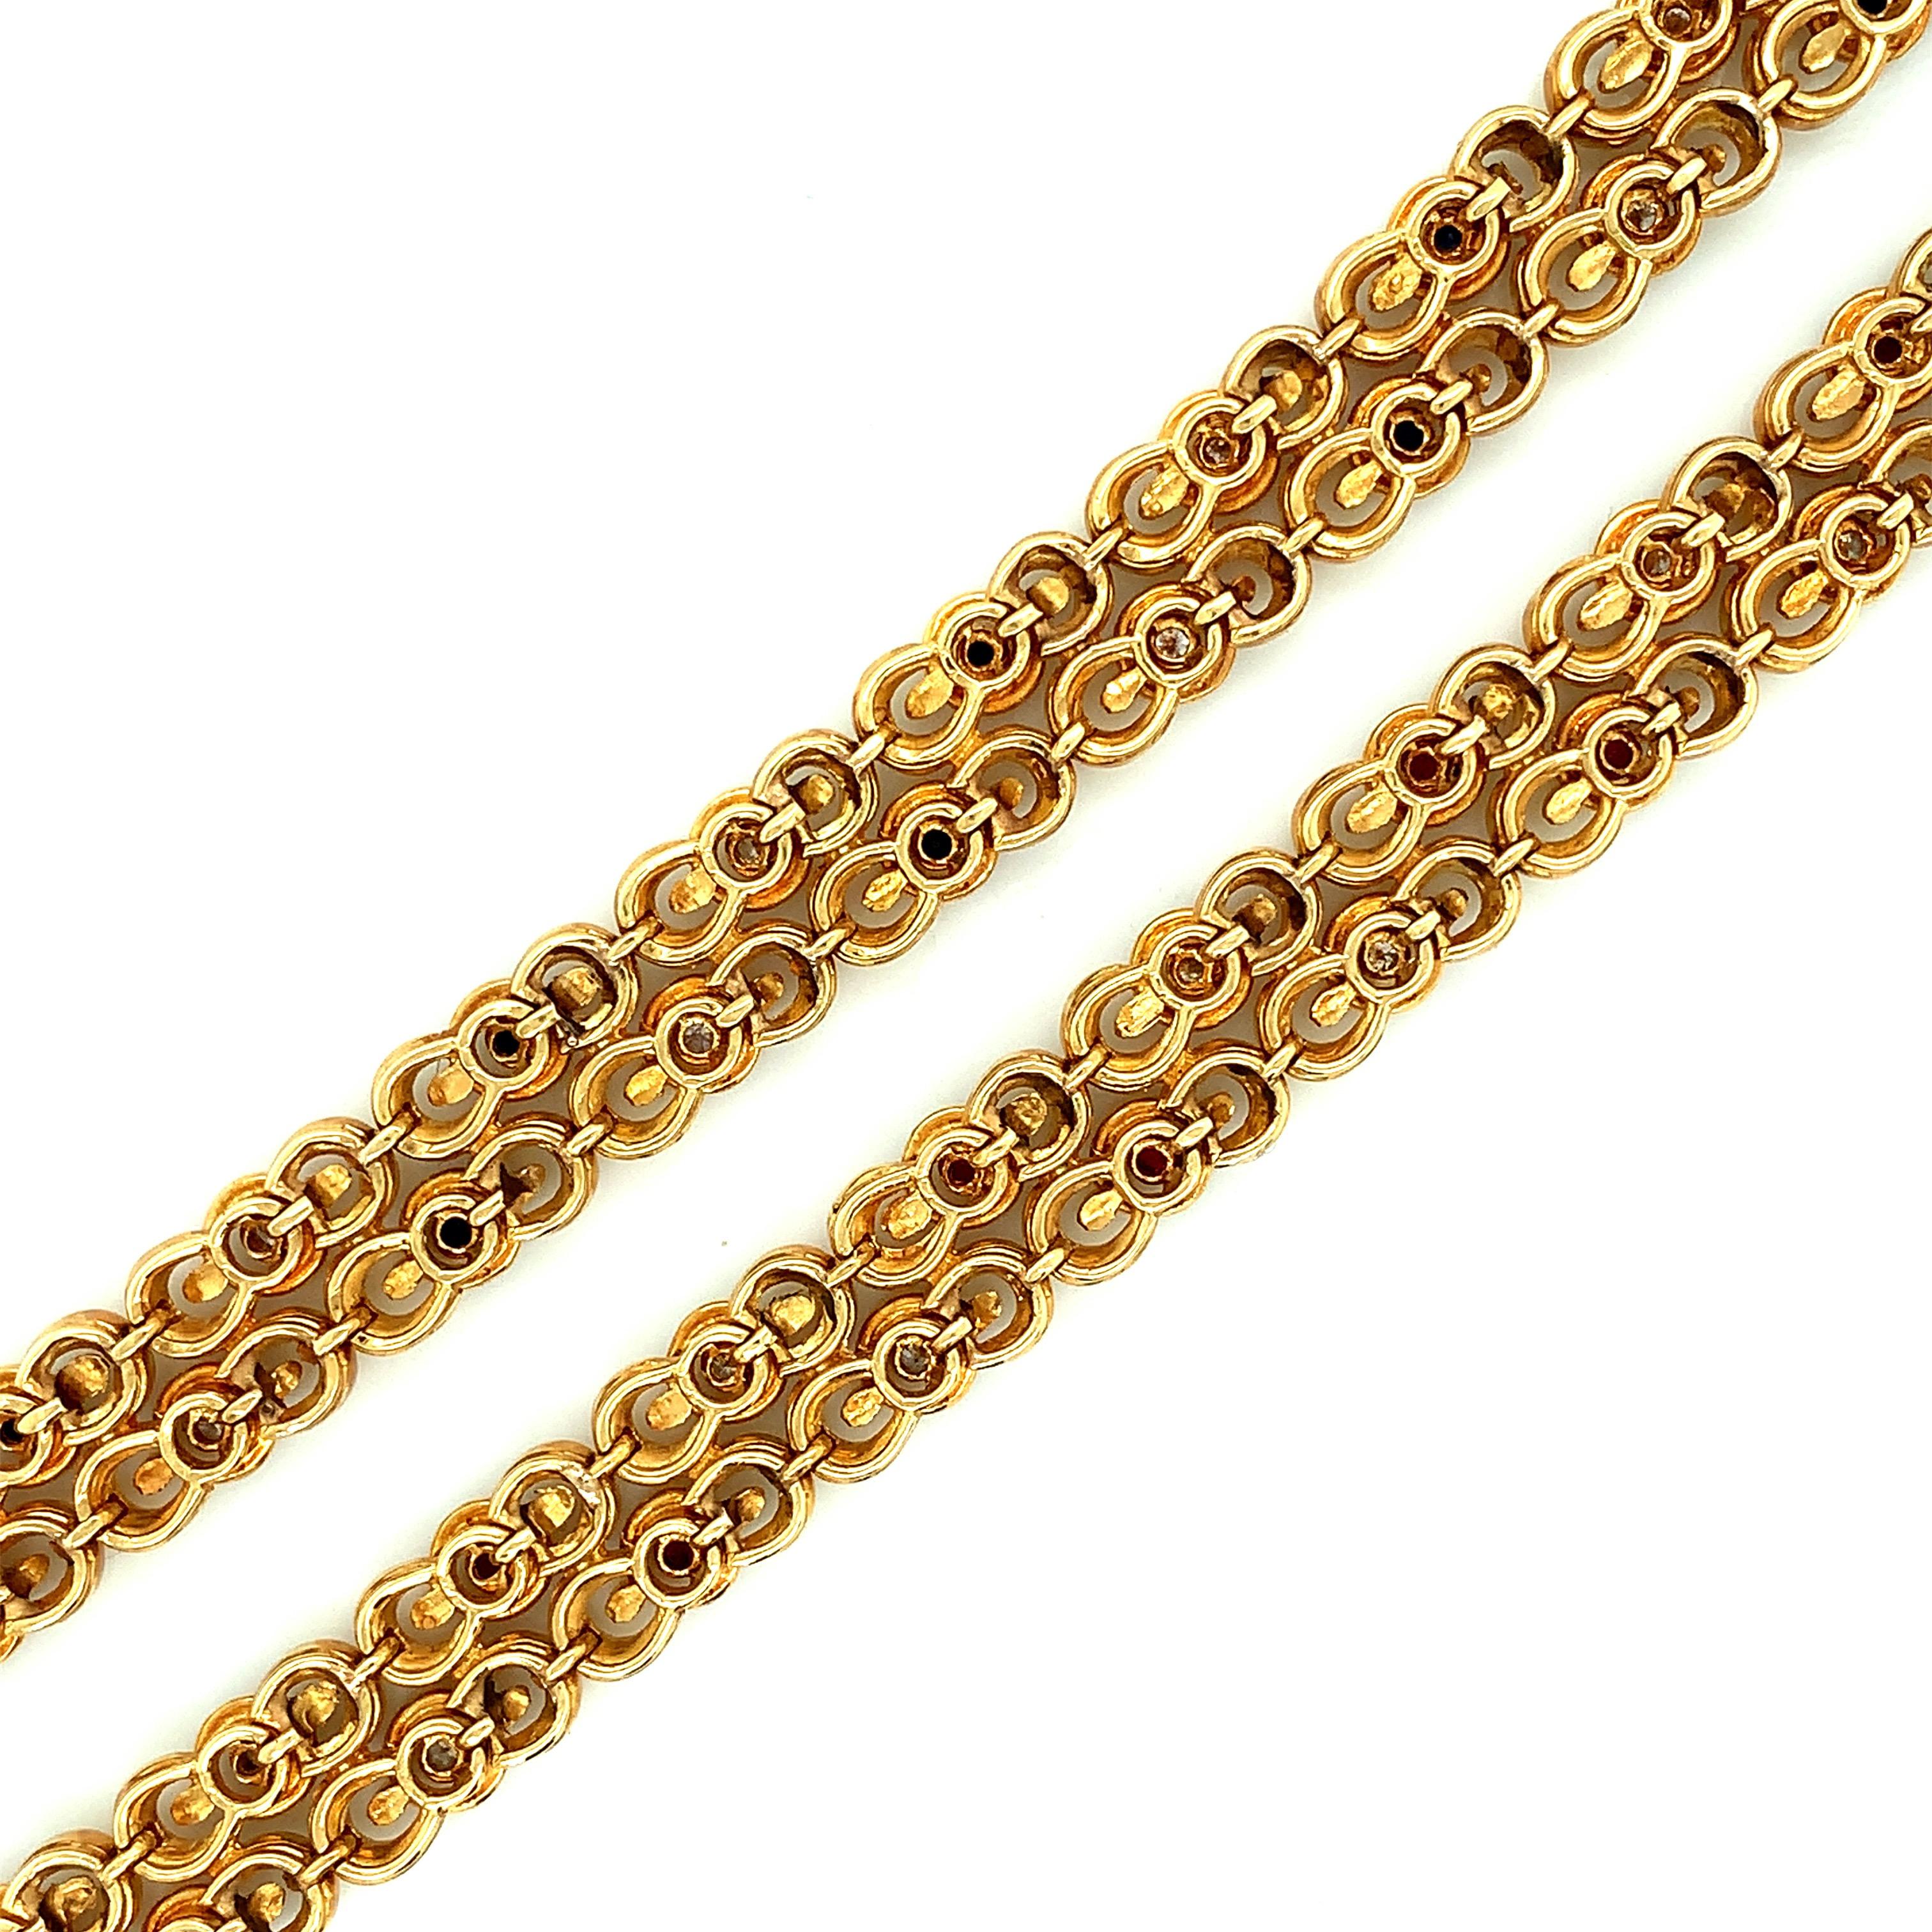 Tiffany & Co. set of two 18 karat yellow gold bracelets. One bracelet features sapphires and diamonds while the other has rubies and diamonds. Individually, they weigh 41.3 grams. Together, the total weight is 82.6 grams. Both measure a length of